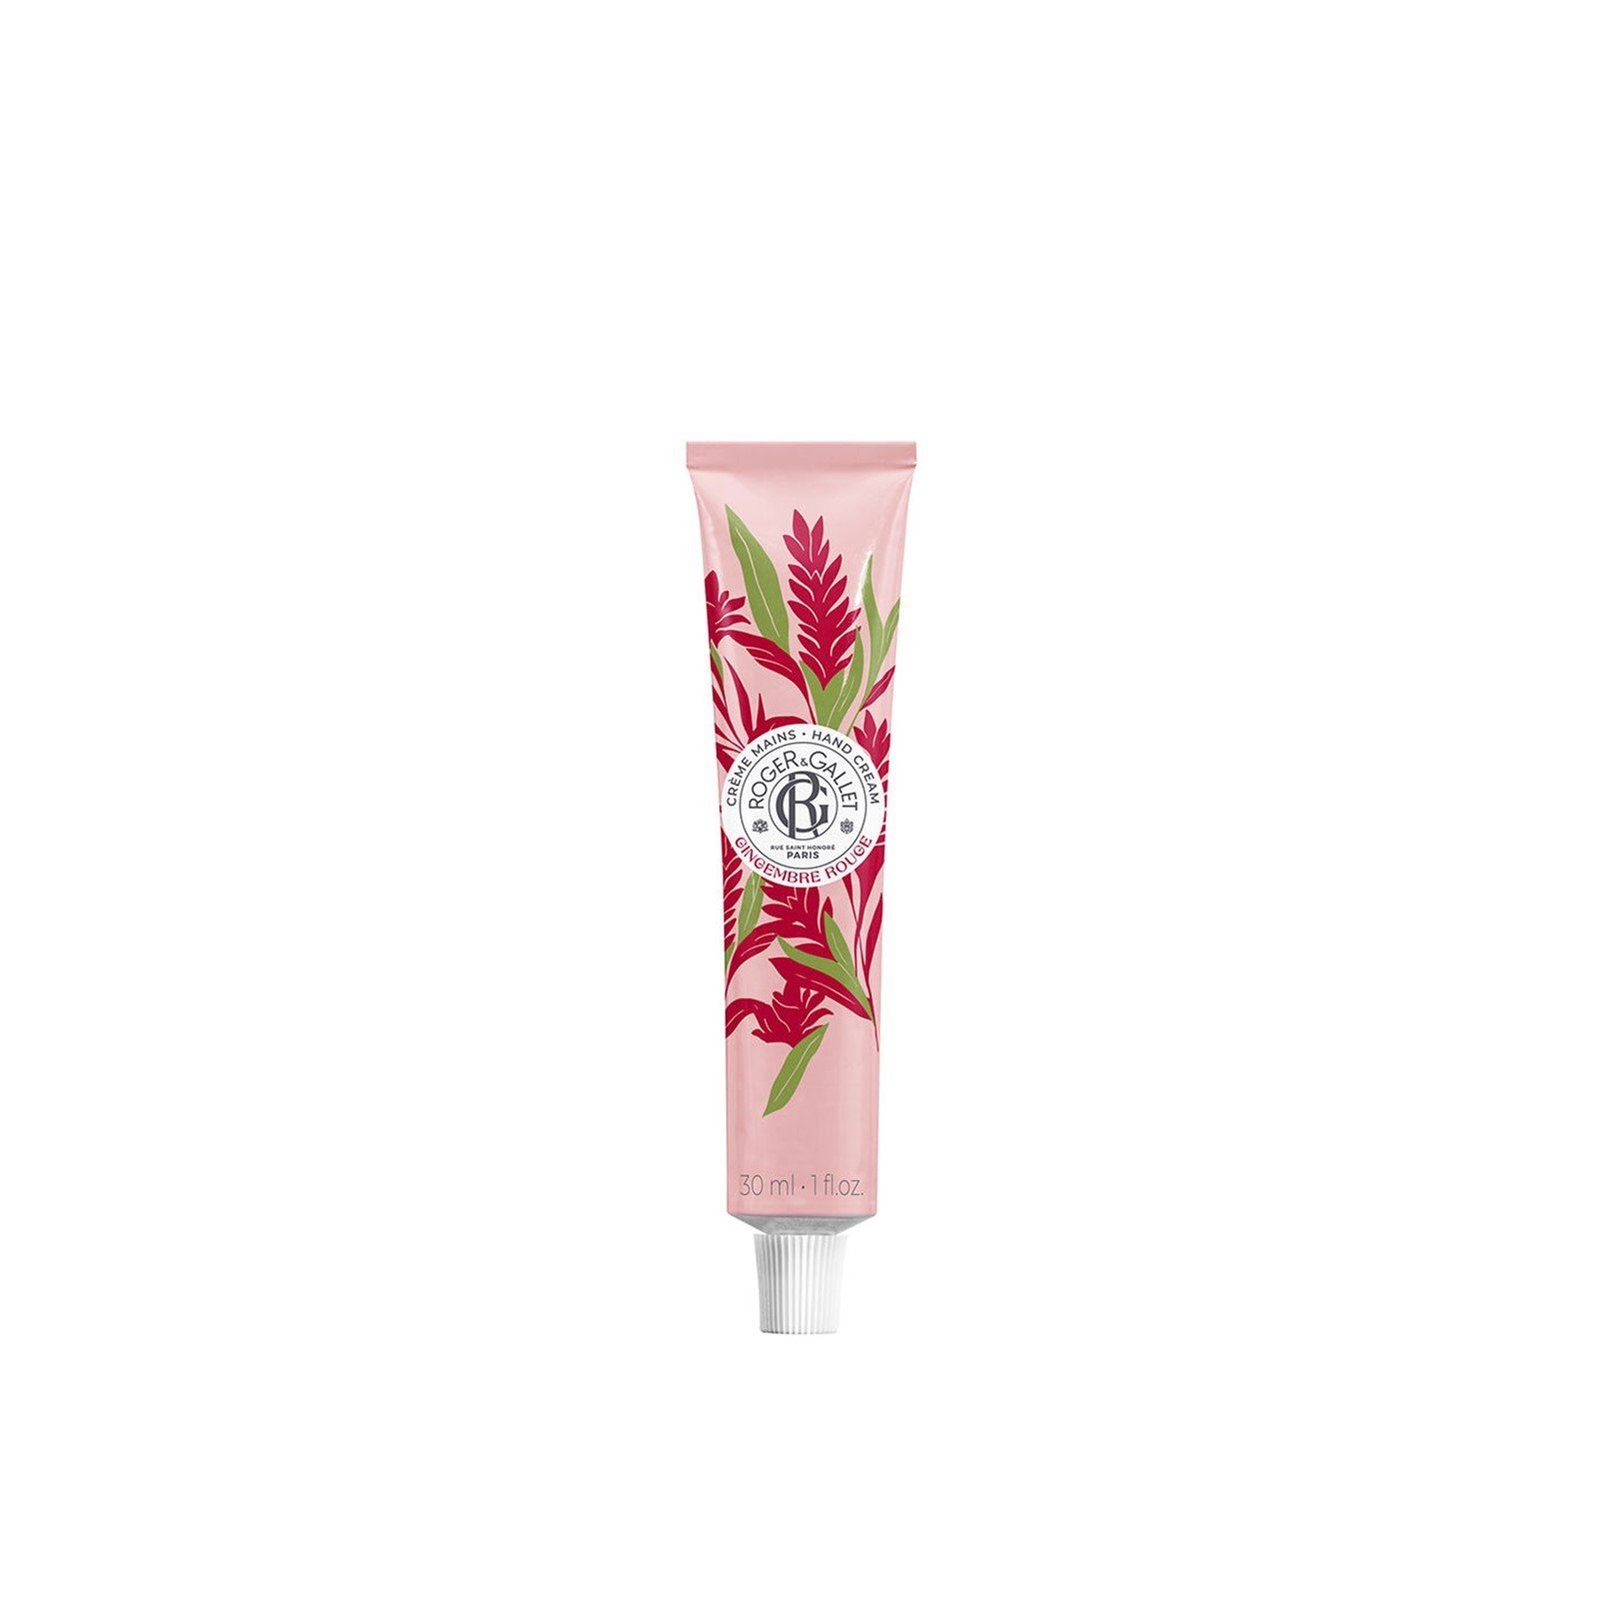 Roger&Gallet Gingembre Rouge Hand & Nail Cream 30ml (1.01fl oz)